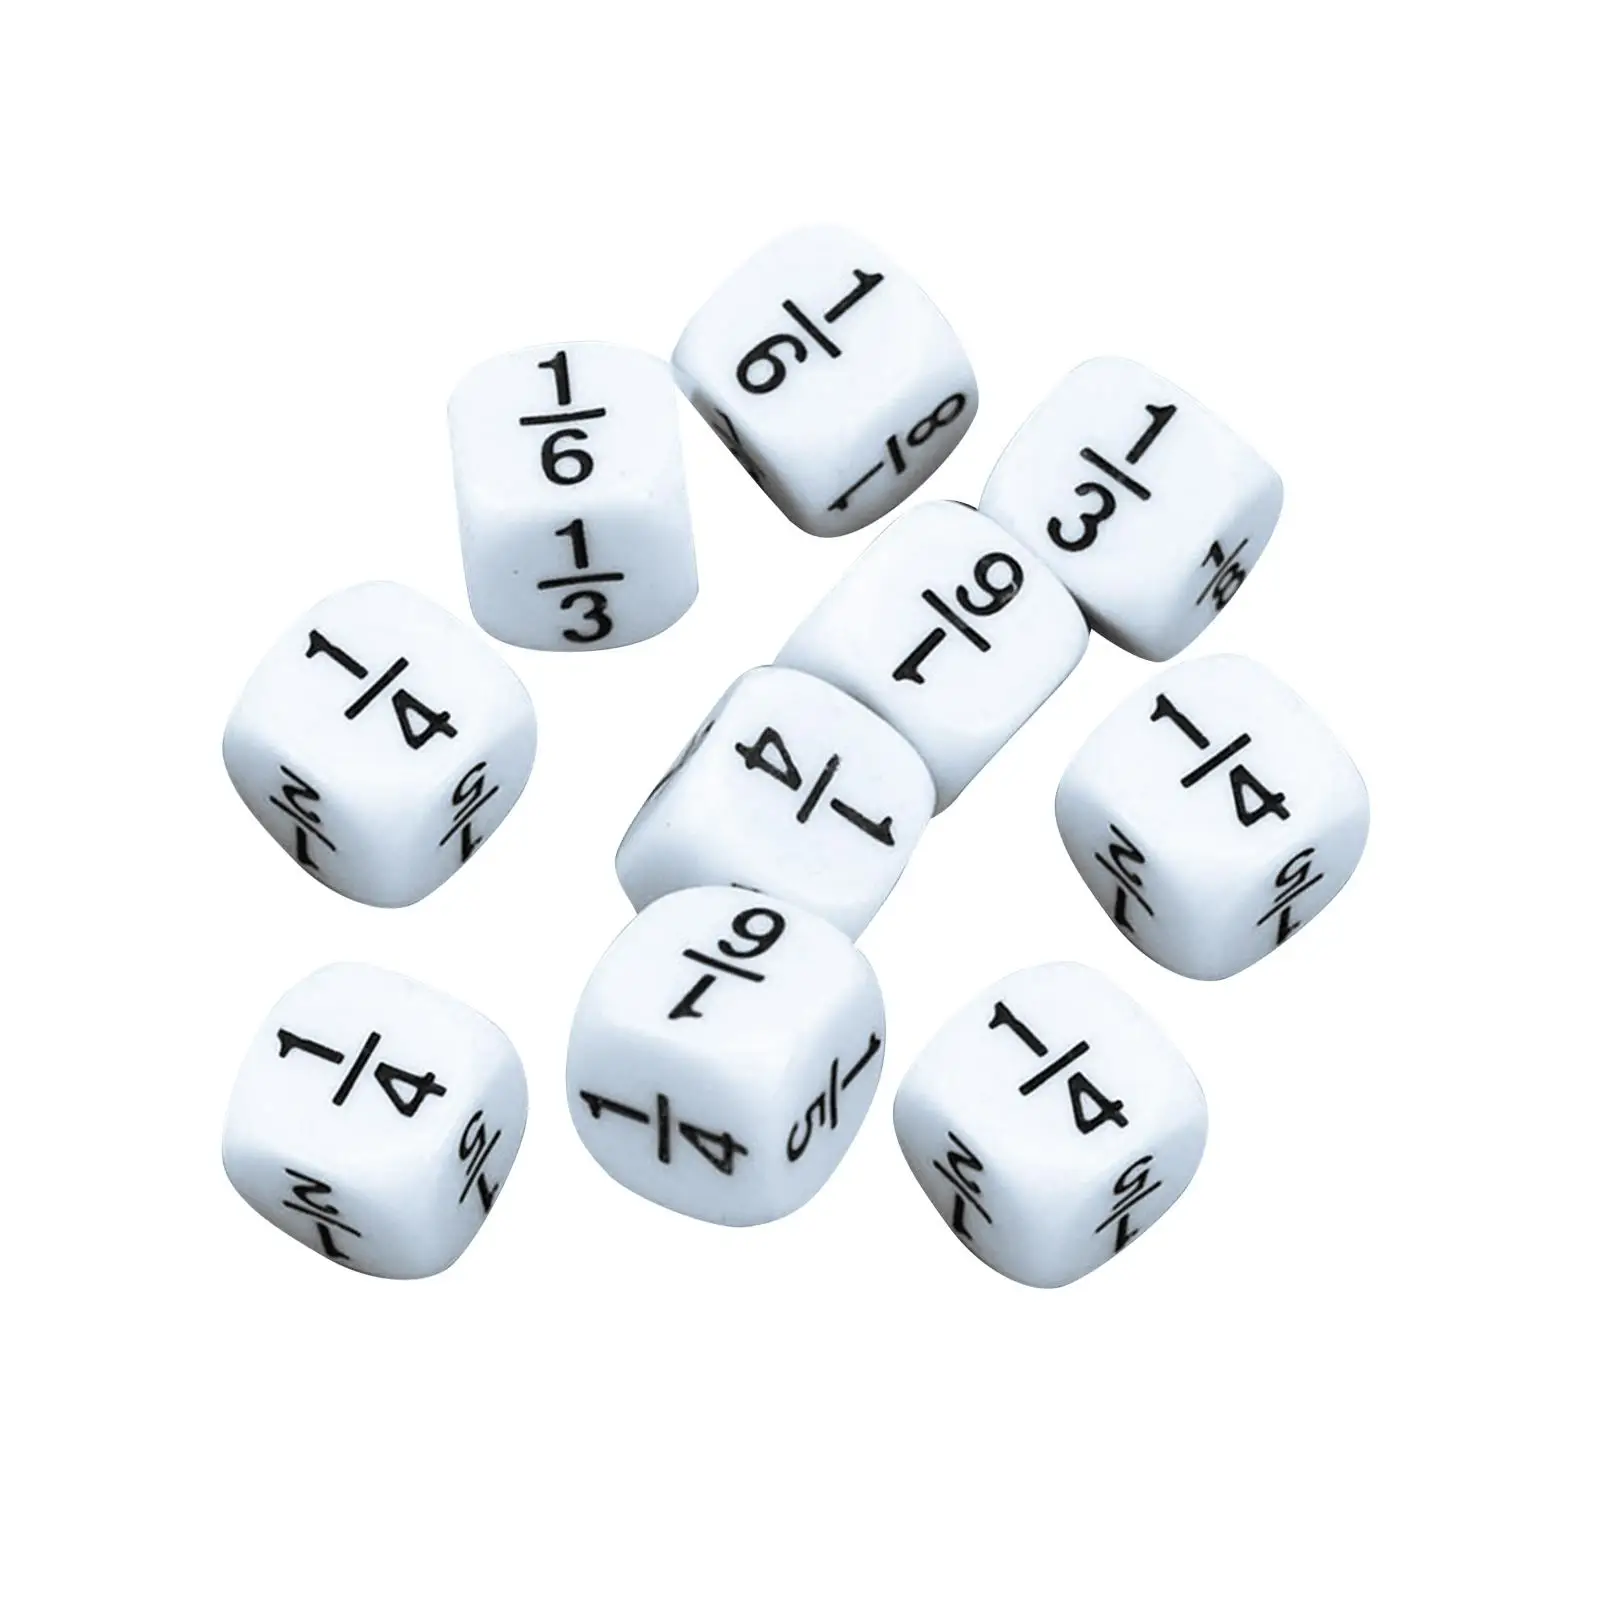 

10 Pieces Fractional Number Dices Montessori Math Toy Measure 0.6x0.6inches